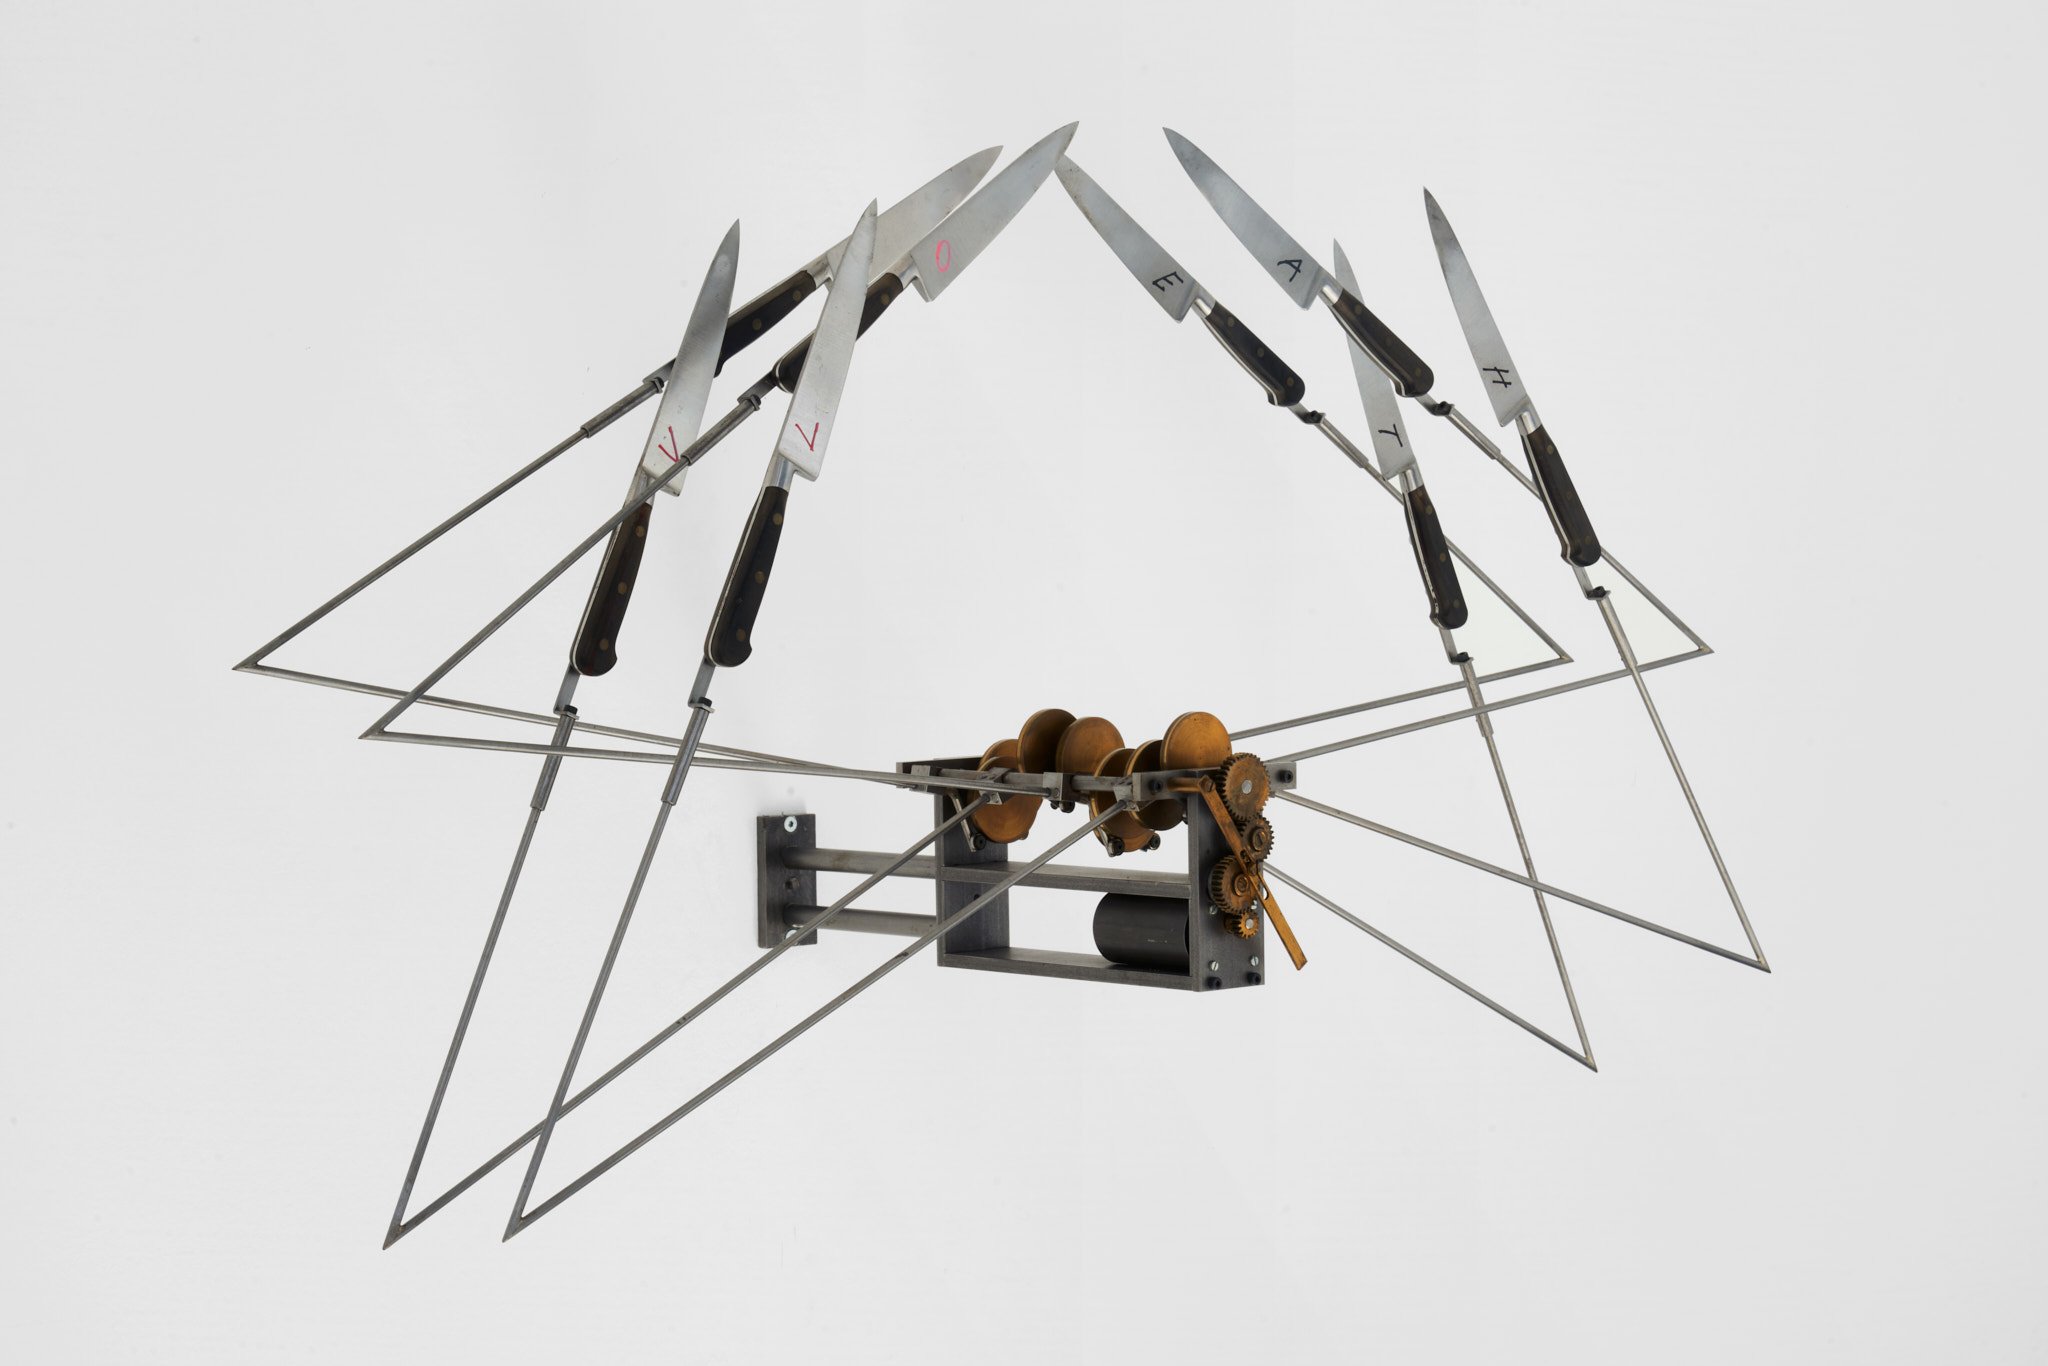  Rebecca Horn  Love and Hate, Knuggle Dome for James Joyce  (2004) Knives, metal construction, motor 23 2/3 x 43 1/3 x 15 3/4 in Courtesy the artist and Galerie Thomas Schulte, Berlin © The artist / VG Bild-Kunst, Bonn 2023  Photo: GRAYSC 